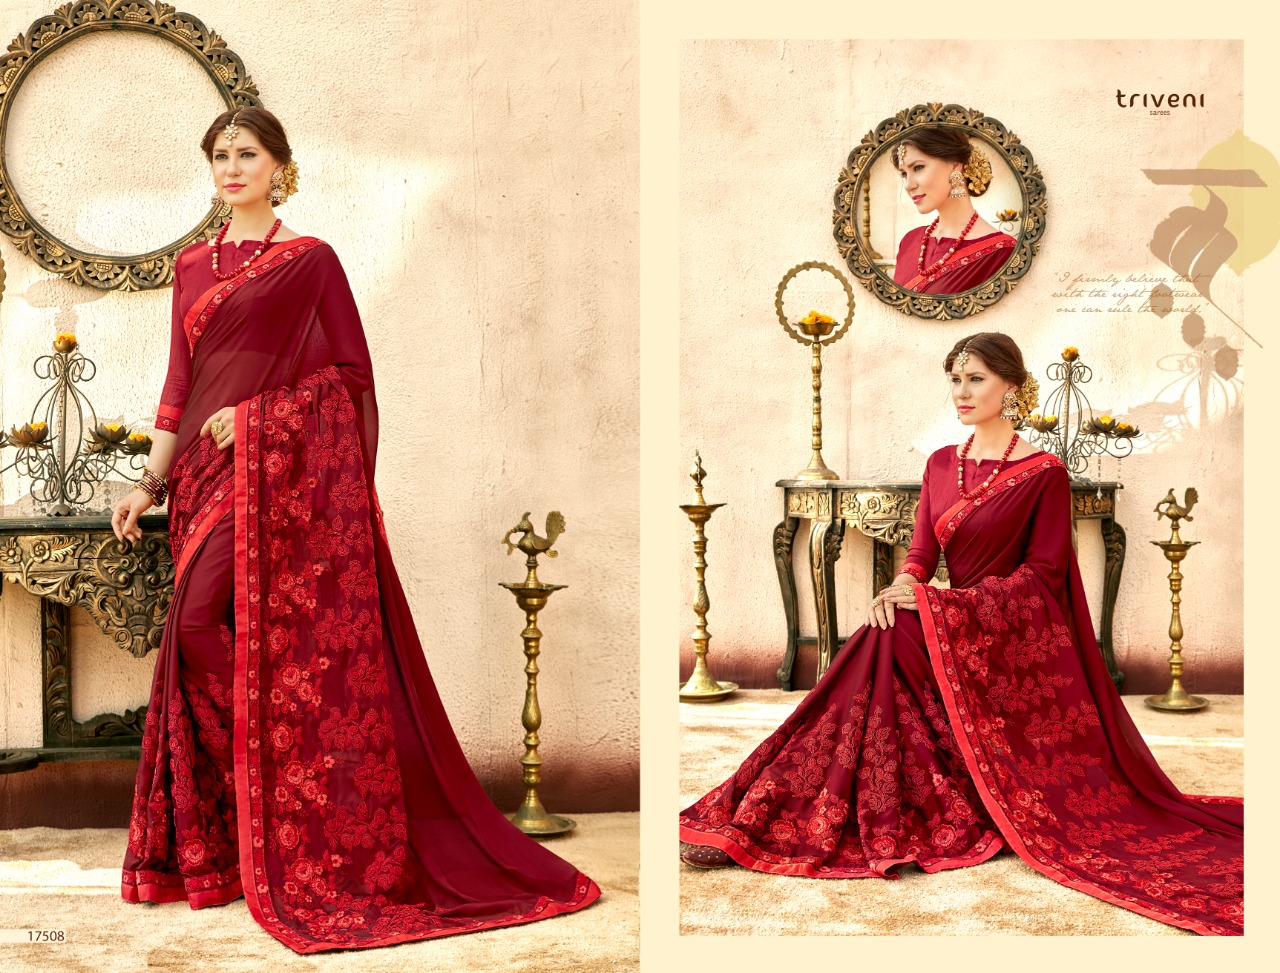 triveni angels colorful designer collection of sarees at reasonable rate